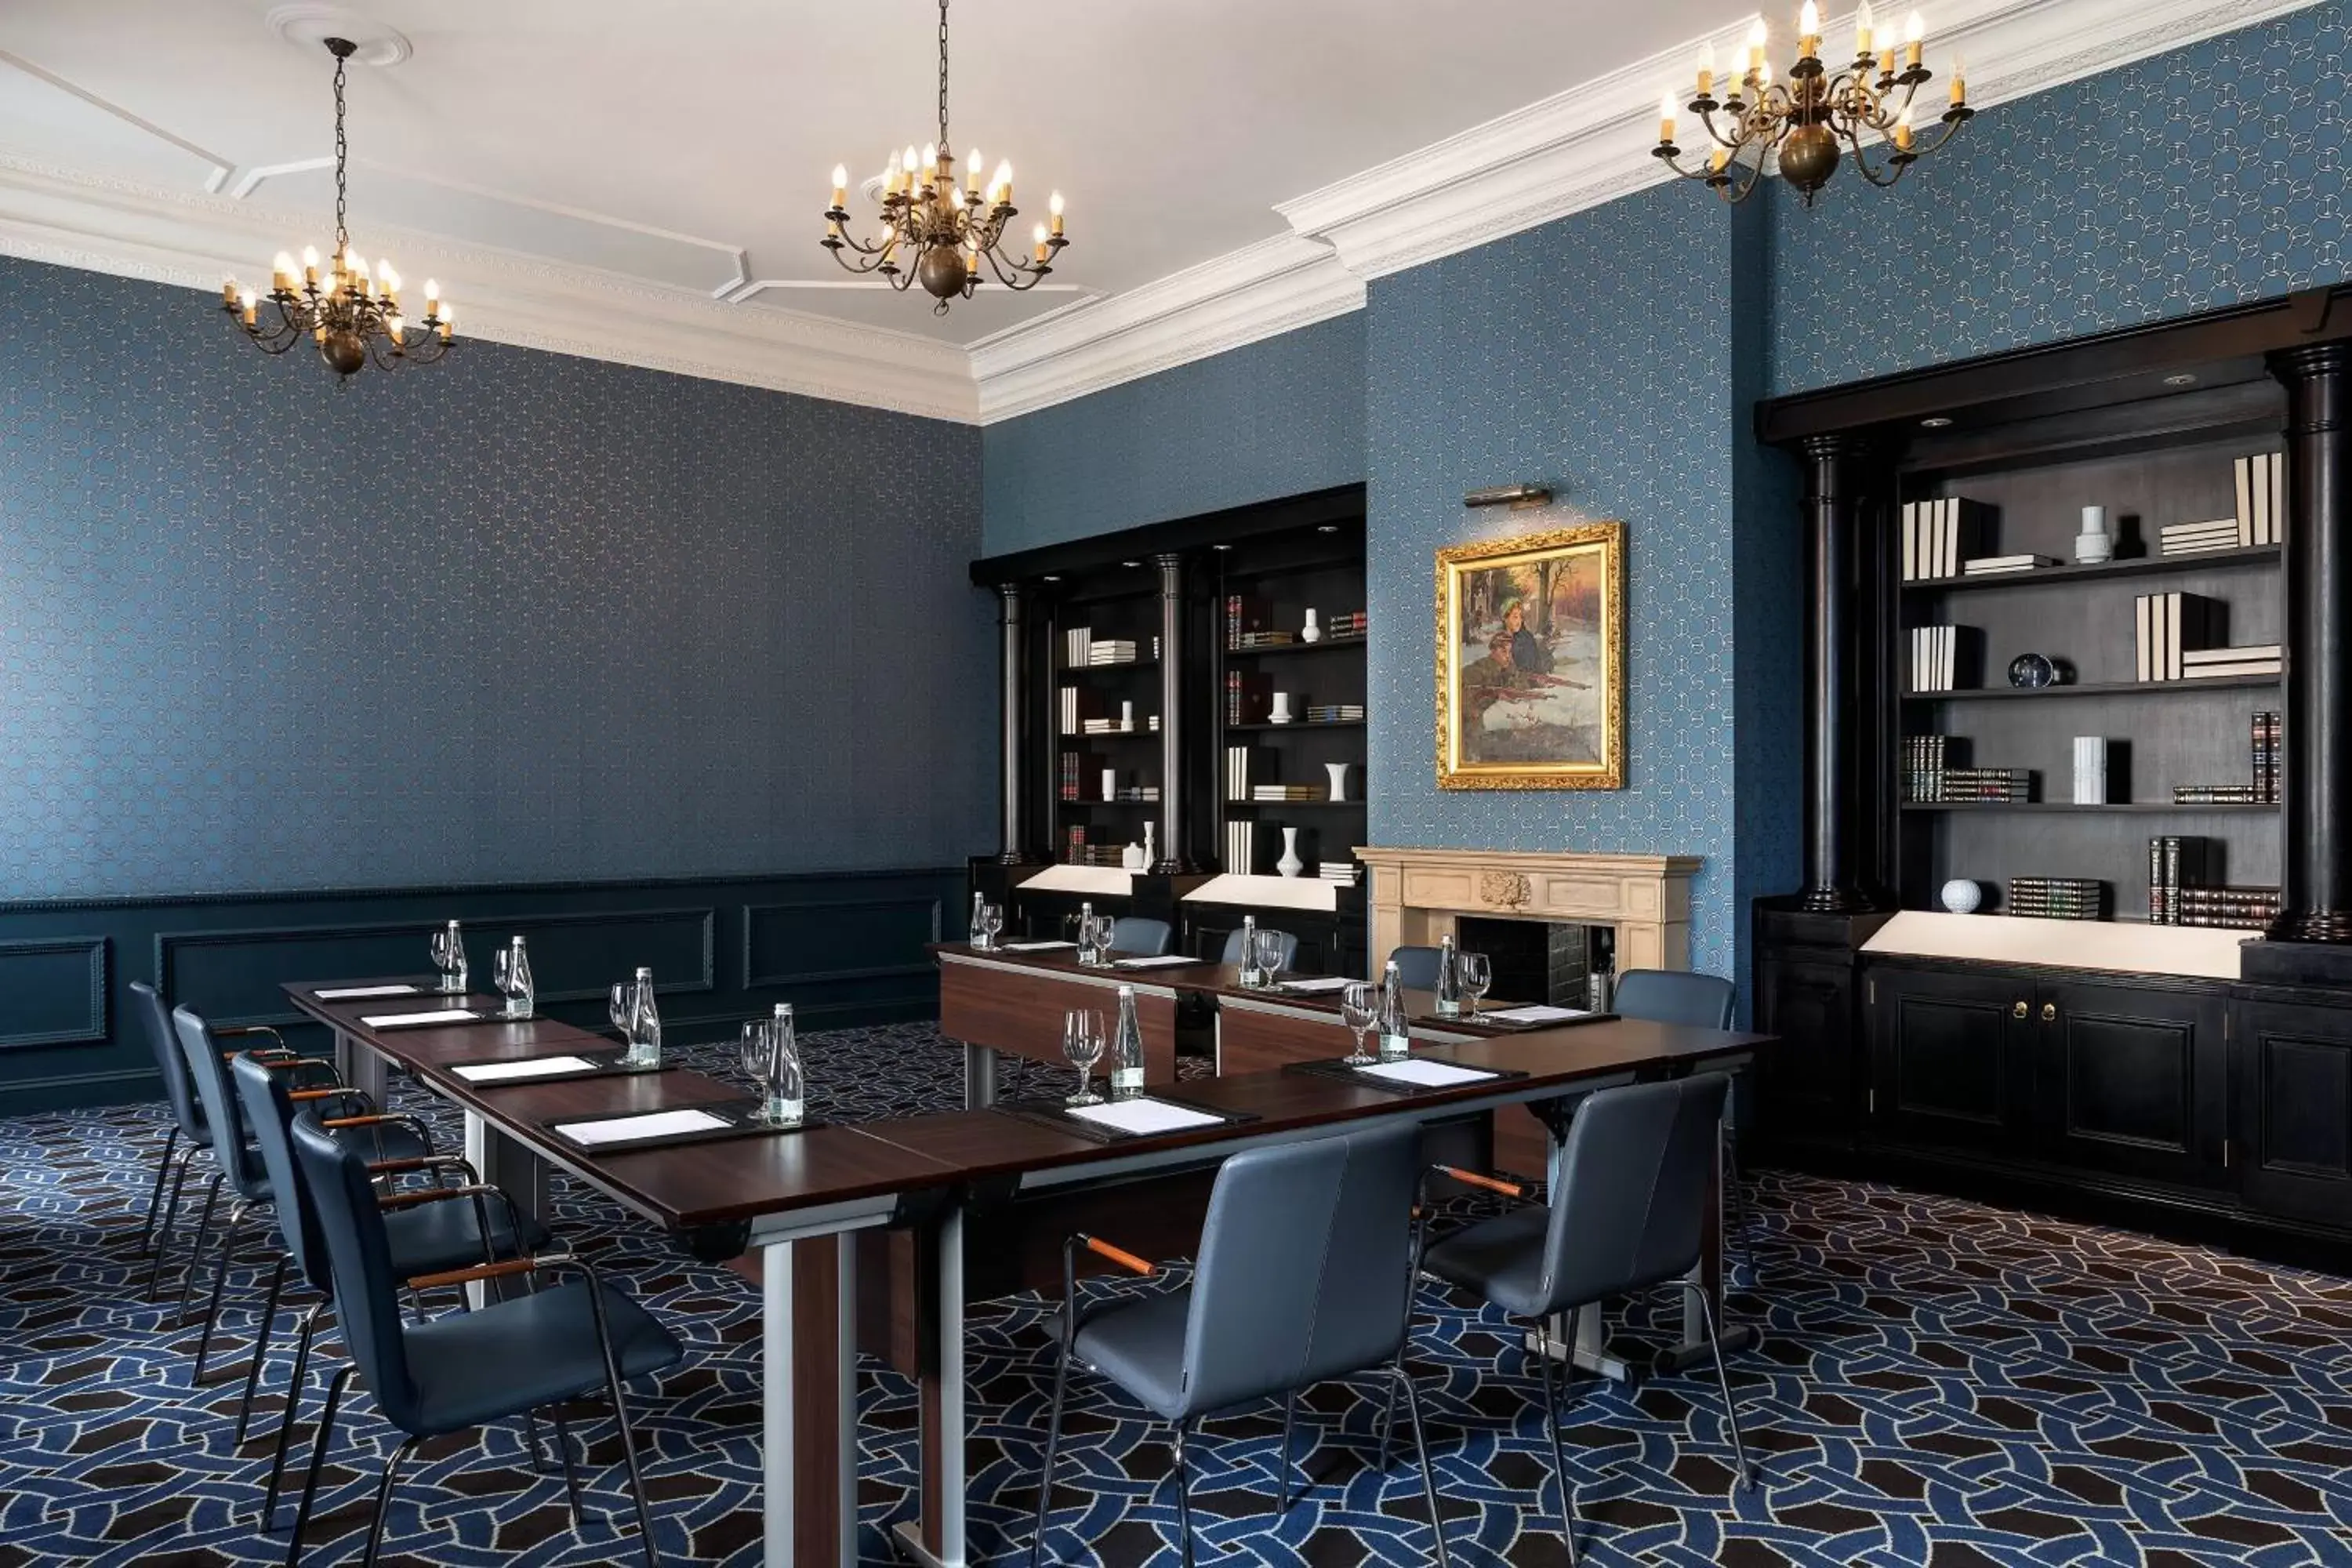 Meeting/conference room in Hotel Bristol, A Luxury Collection Hotel, Warsaw